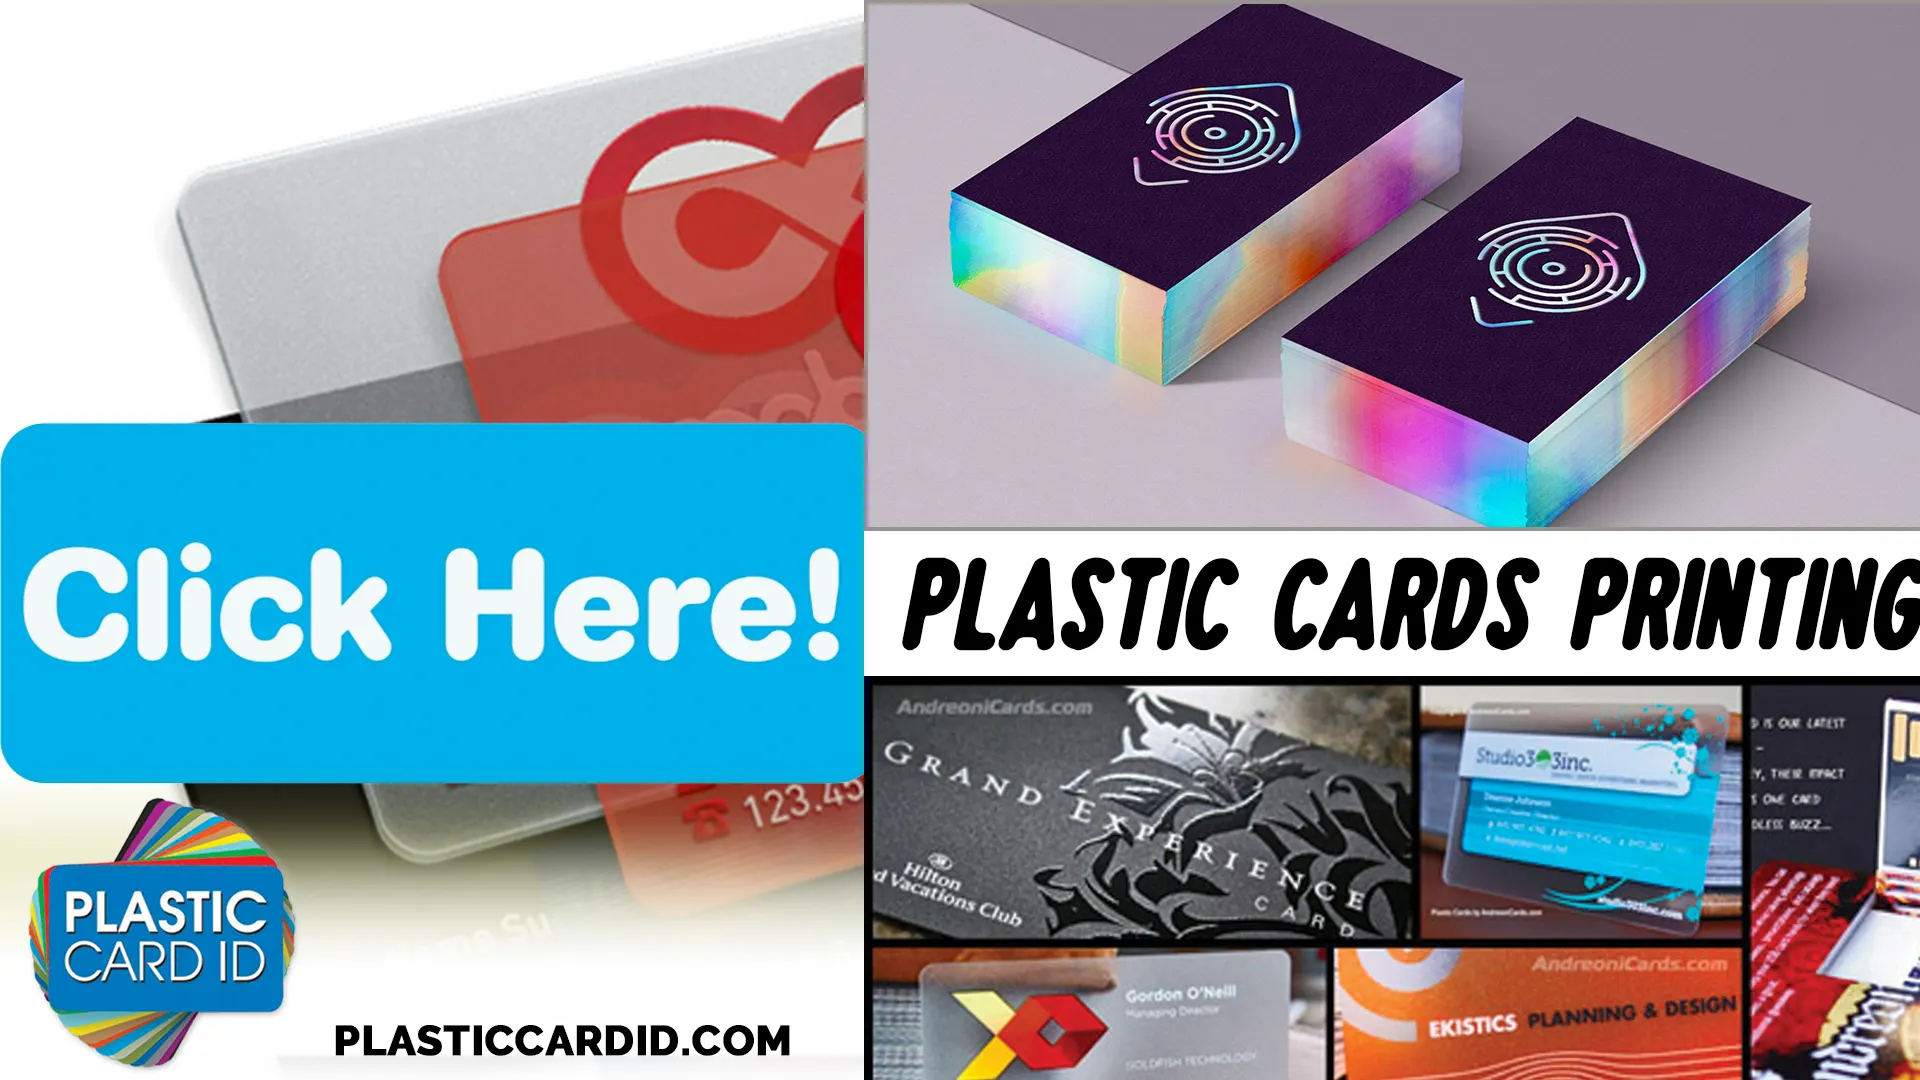 The Impact of Plastic Cards on Patient Care